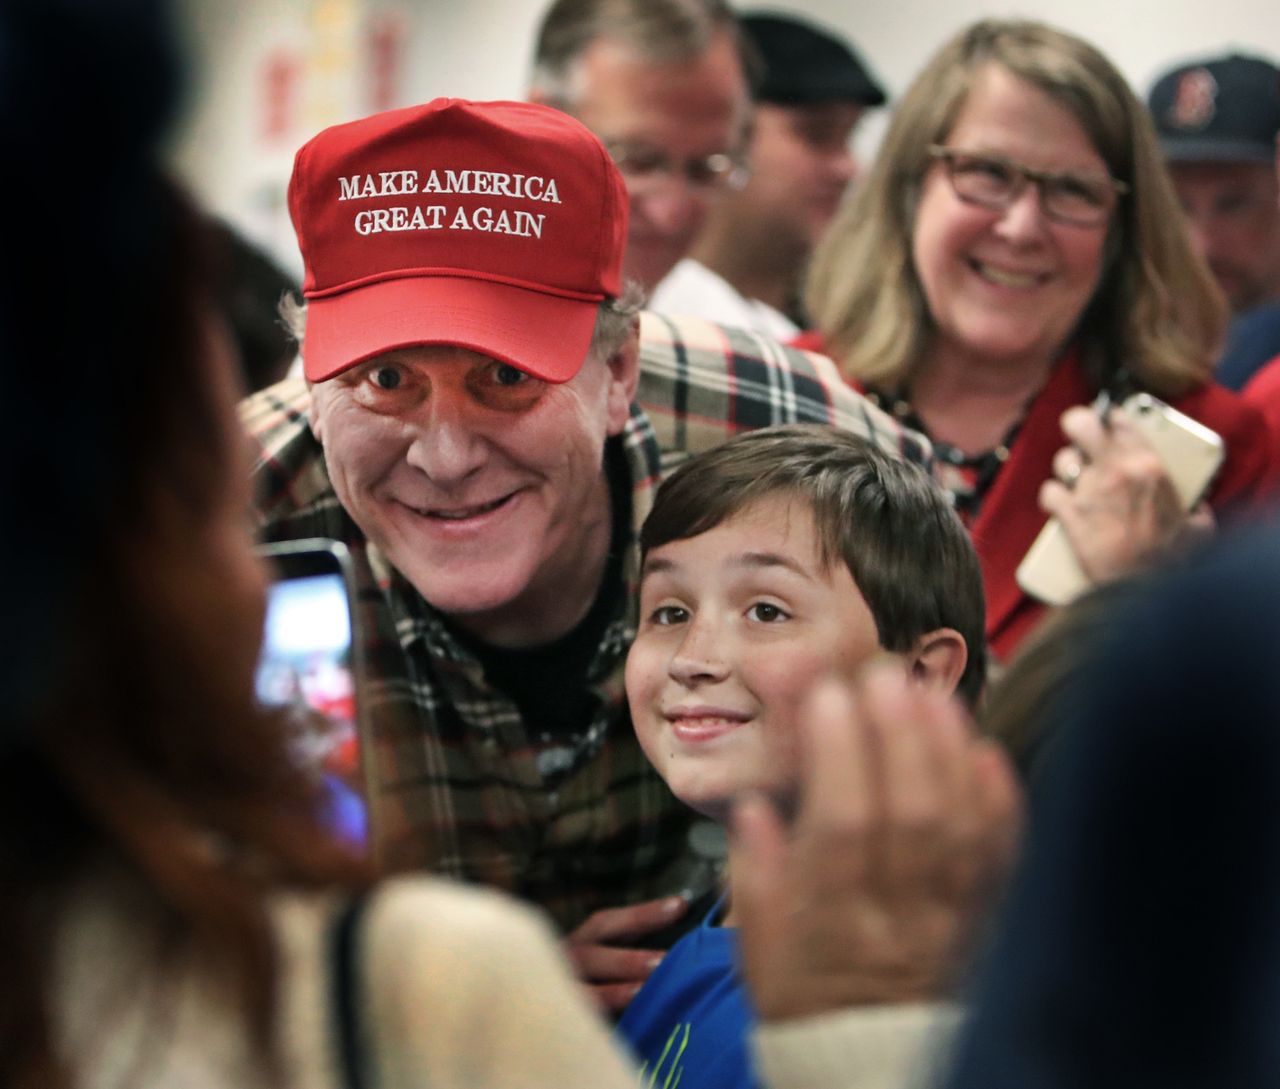 Former Red Sox pitcher Curt Schilling campaigned for Donald Trump in New Hampshire during the 2016 election. Massachusetts didn't want to hear from him anymore.